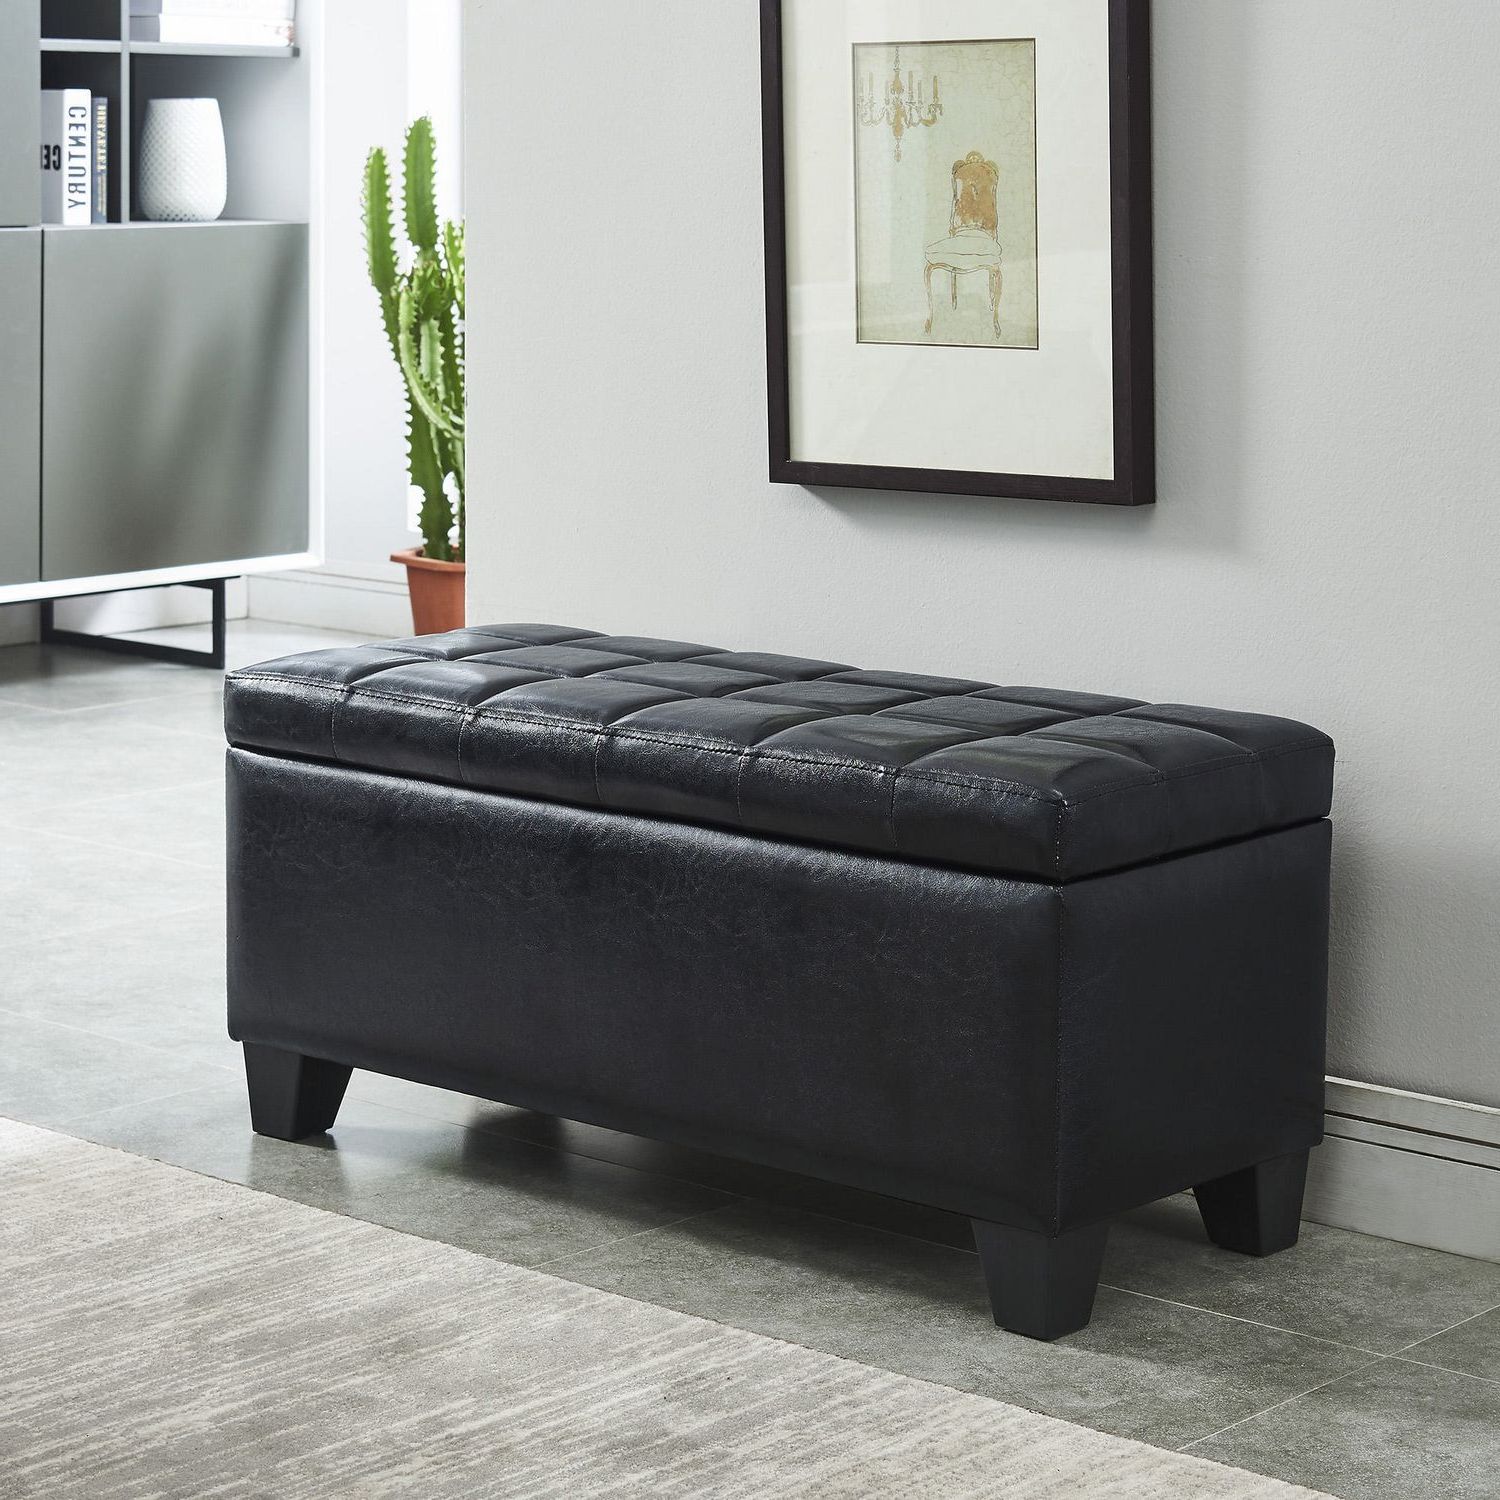 Newest Black Faux Leather Ottomans In Worldwide Homefurnishings Inc Faux Leather Storage Ottoman  Black (View 6 of 10)